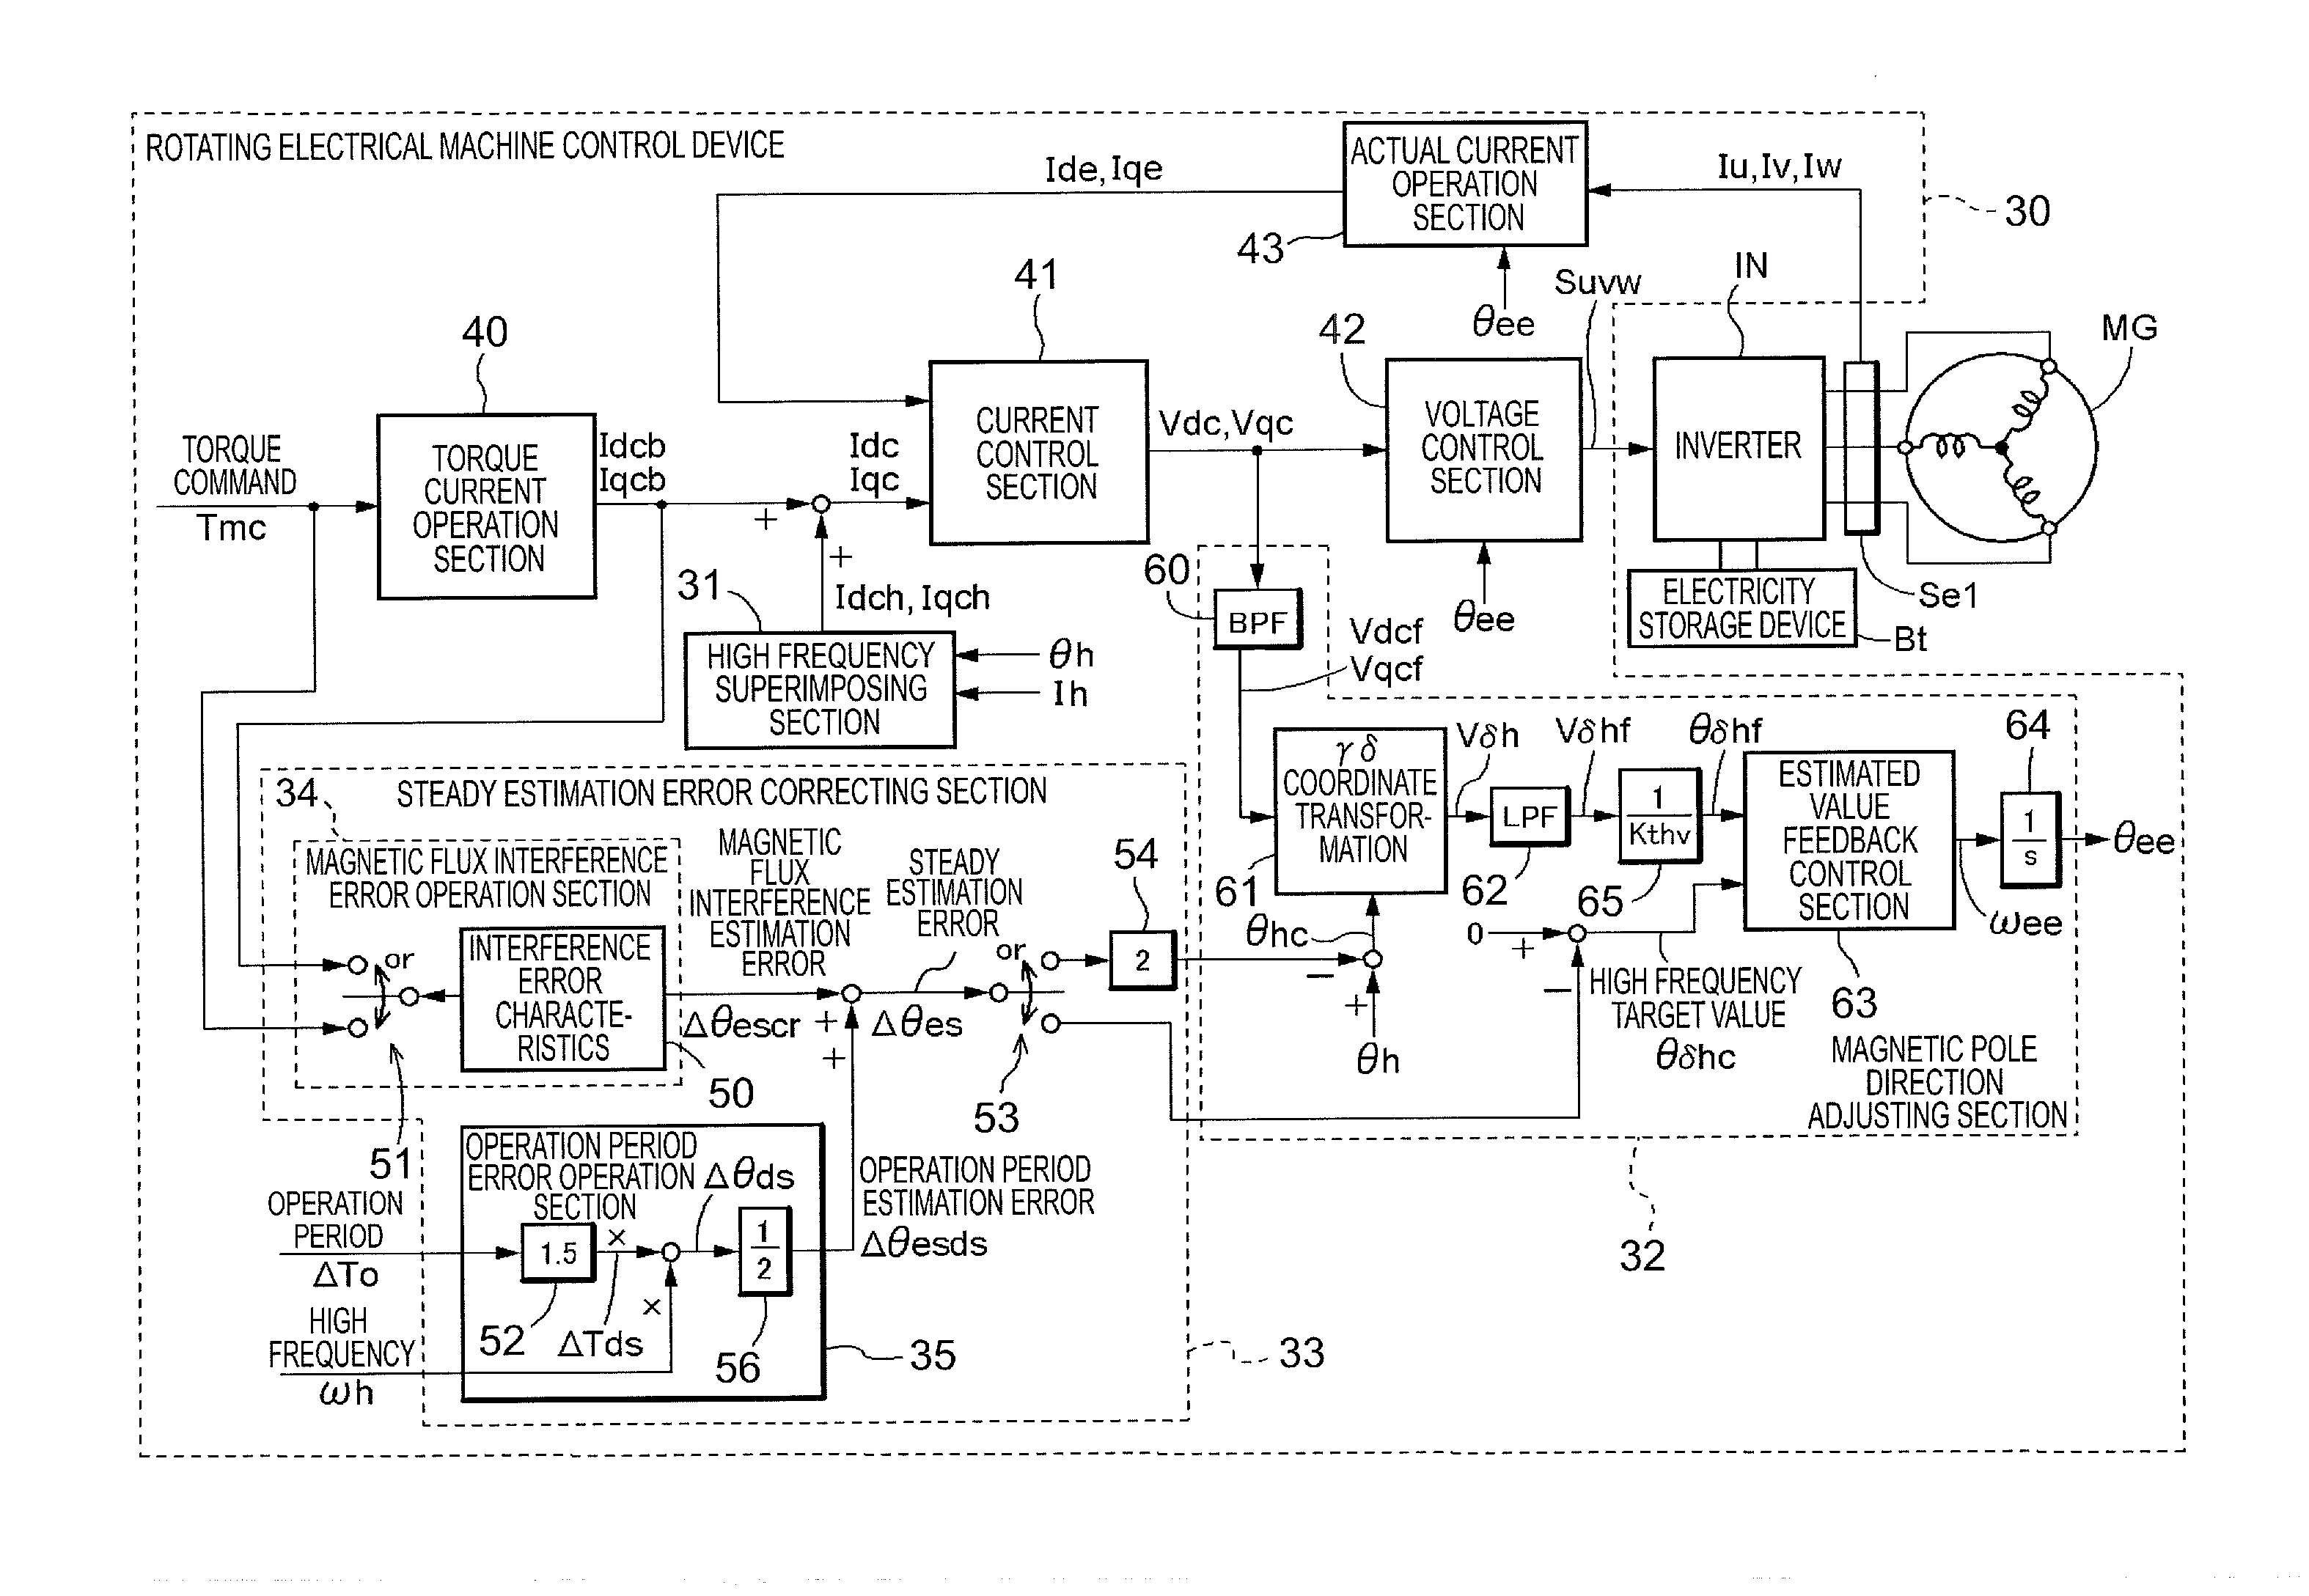 Rotating electrical machine control device